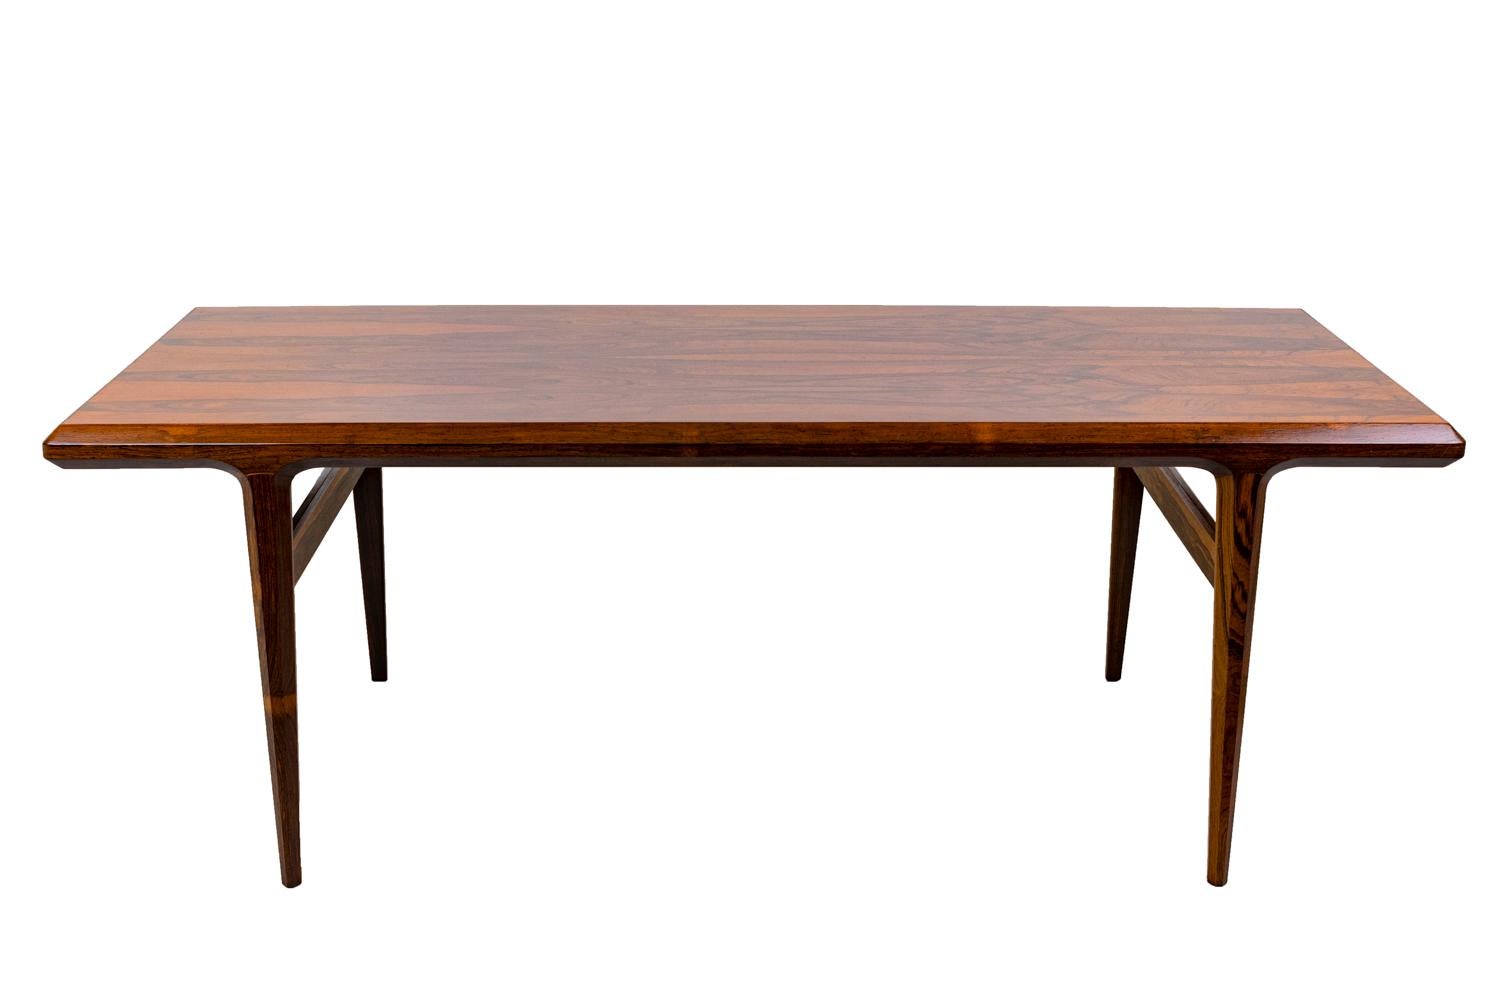 Johannes Andersen, attributed to.
Coffee table in rosewood standing on four legs linked two by two by stretchers. Rectangular tray with a movable black lacquered writing leaf on one side.

Work realized in the 1960s.

Johannes Andersen